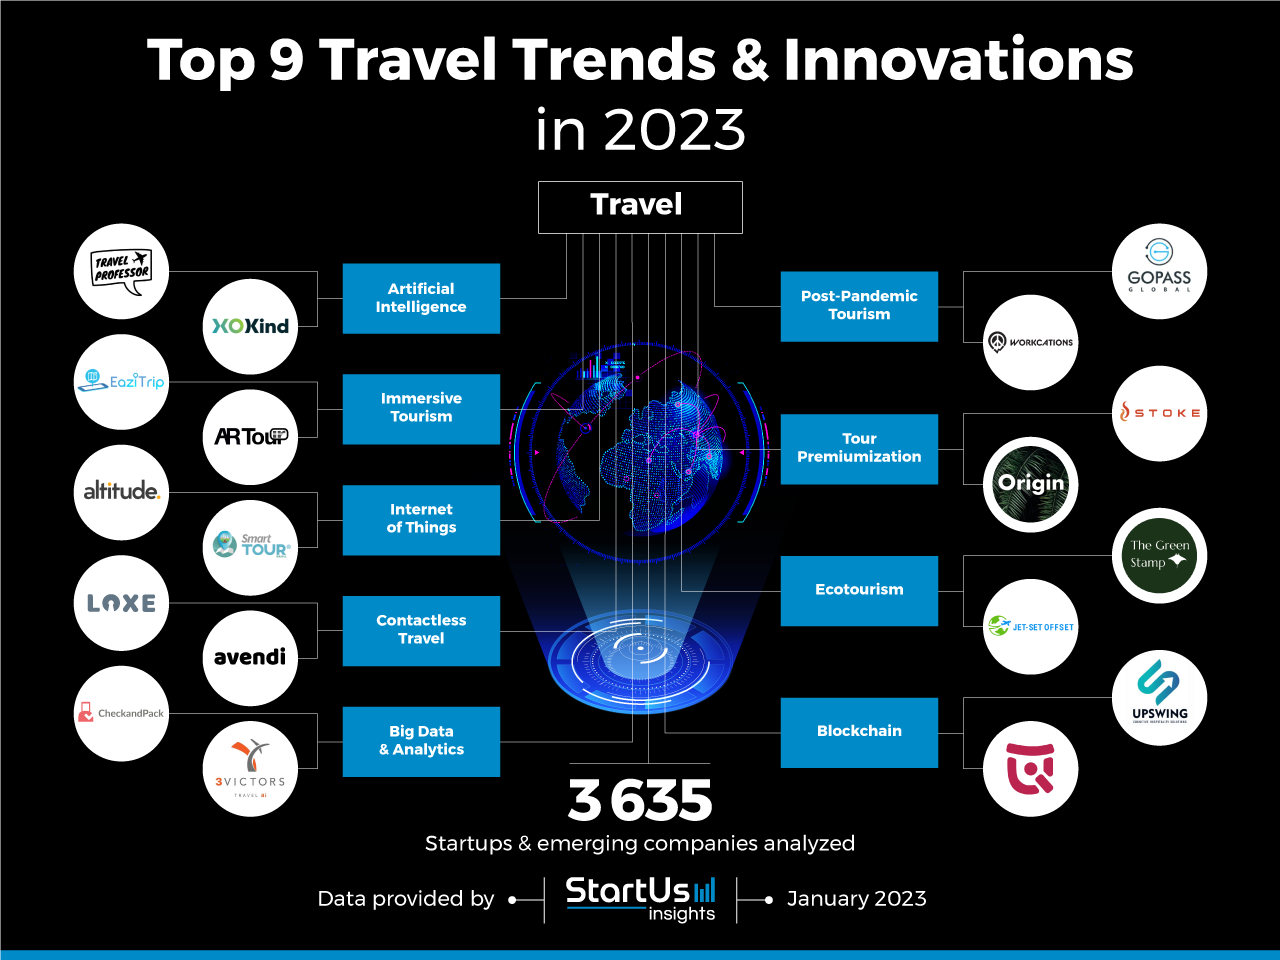 travel trends for the future